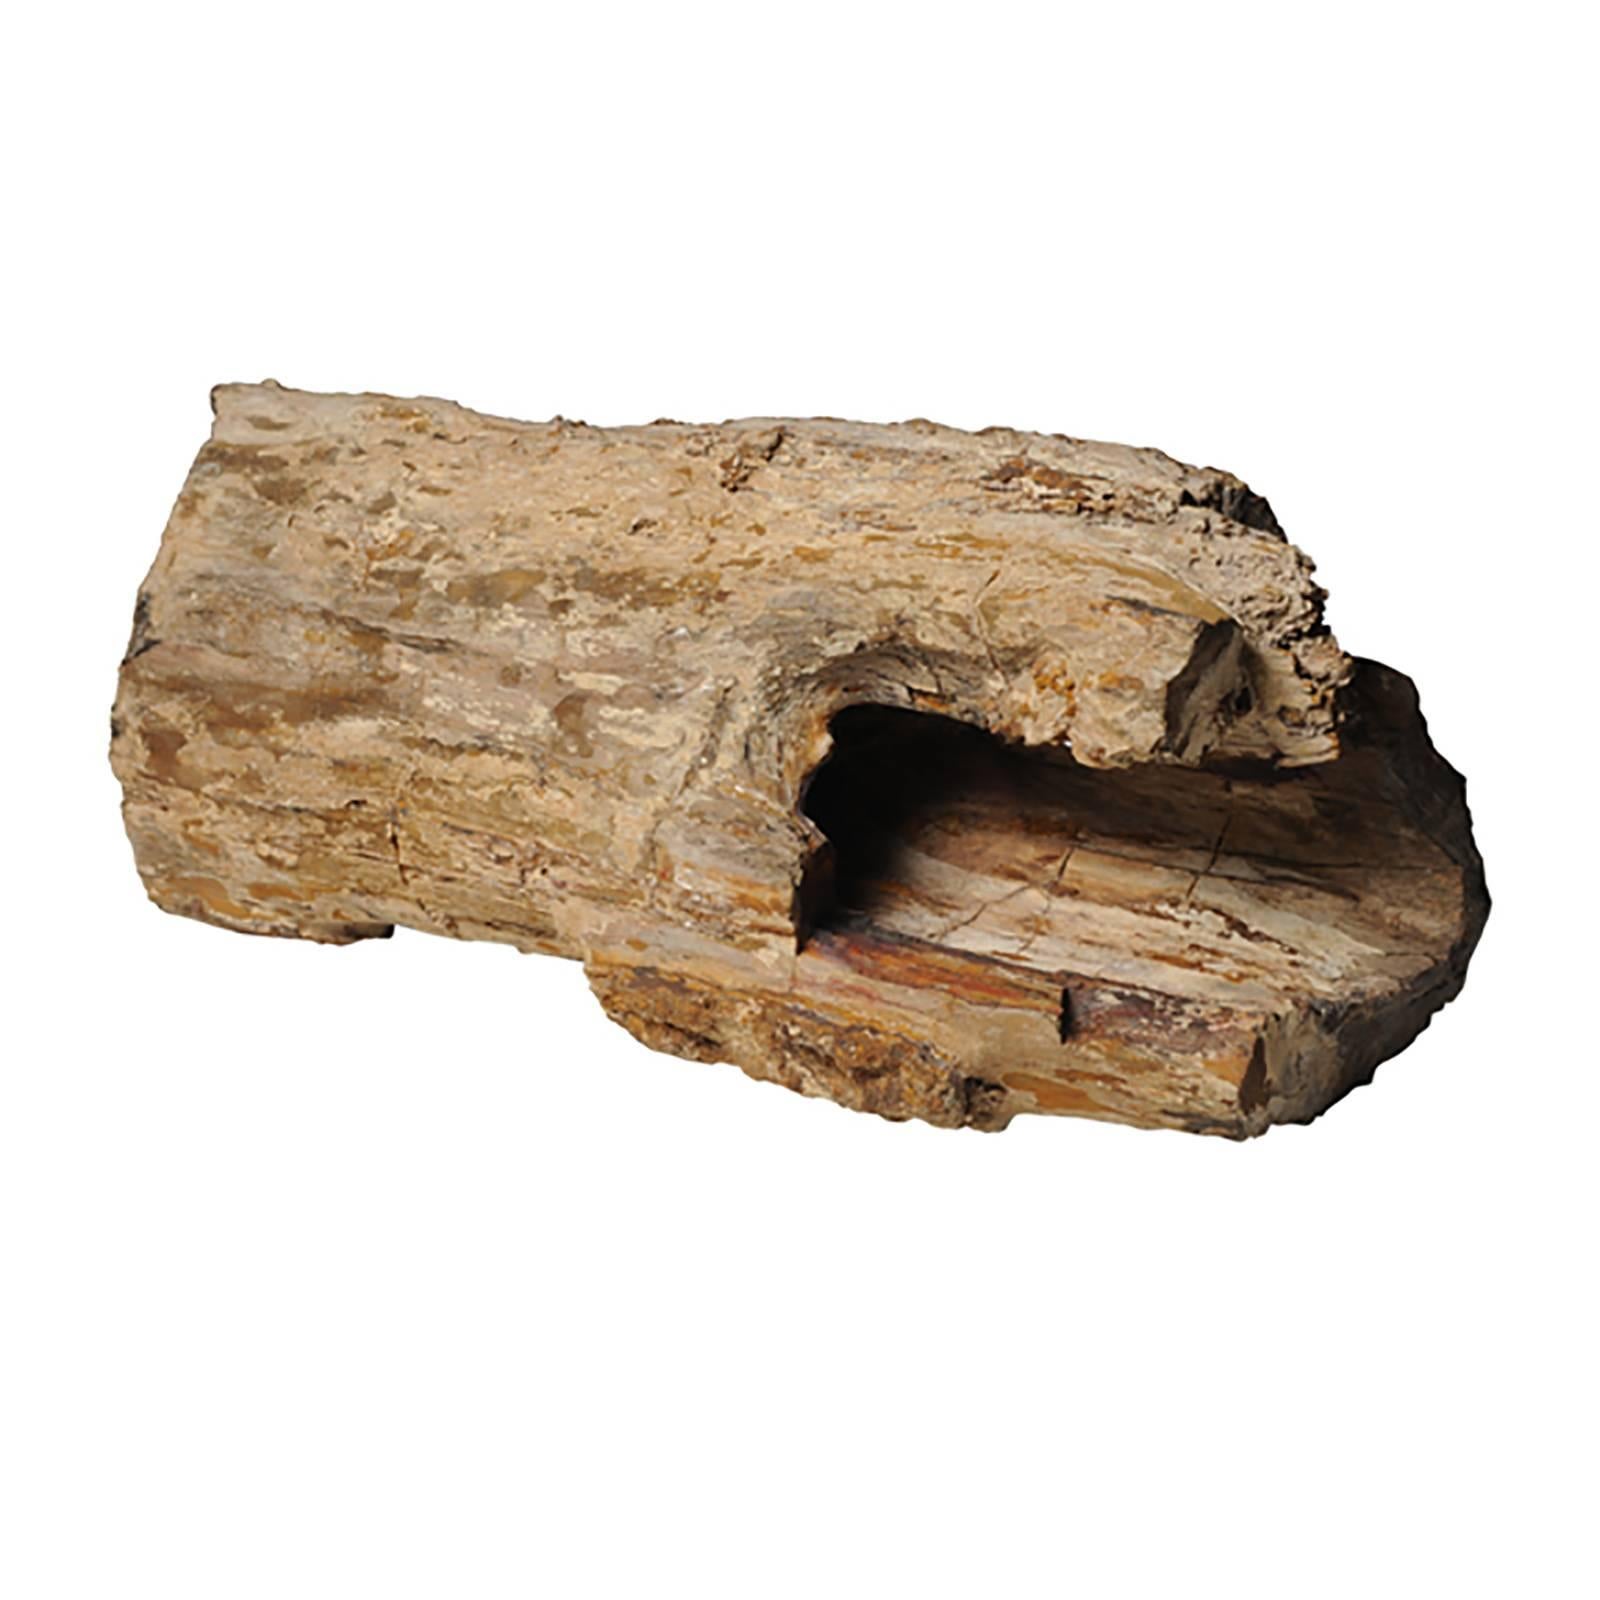 Like scholars' rocks, petrified, or fossilized, wood is appreciated for its natural beauty. Sometimes called 